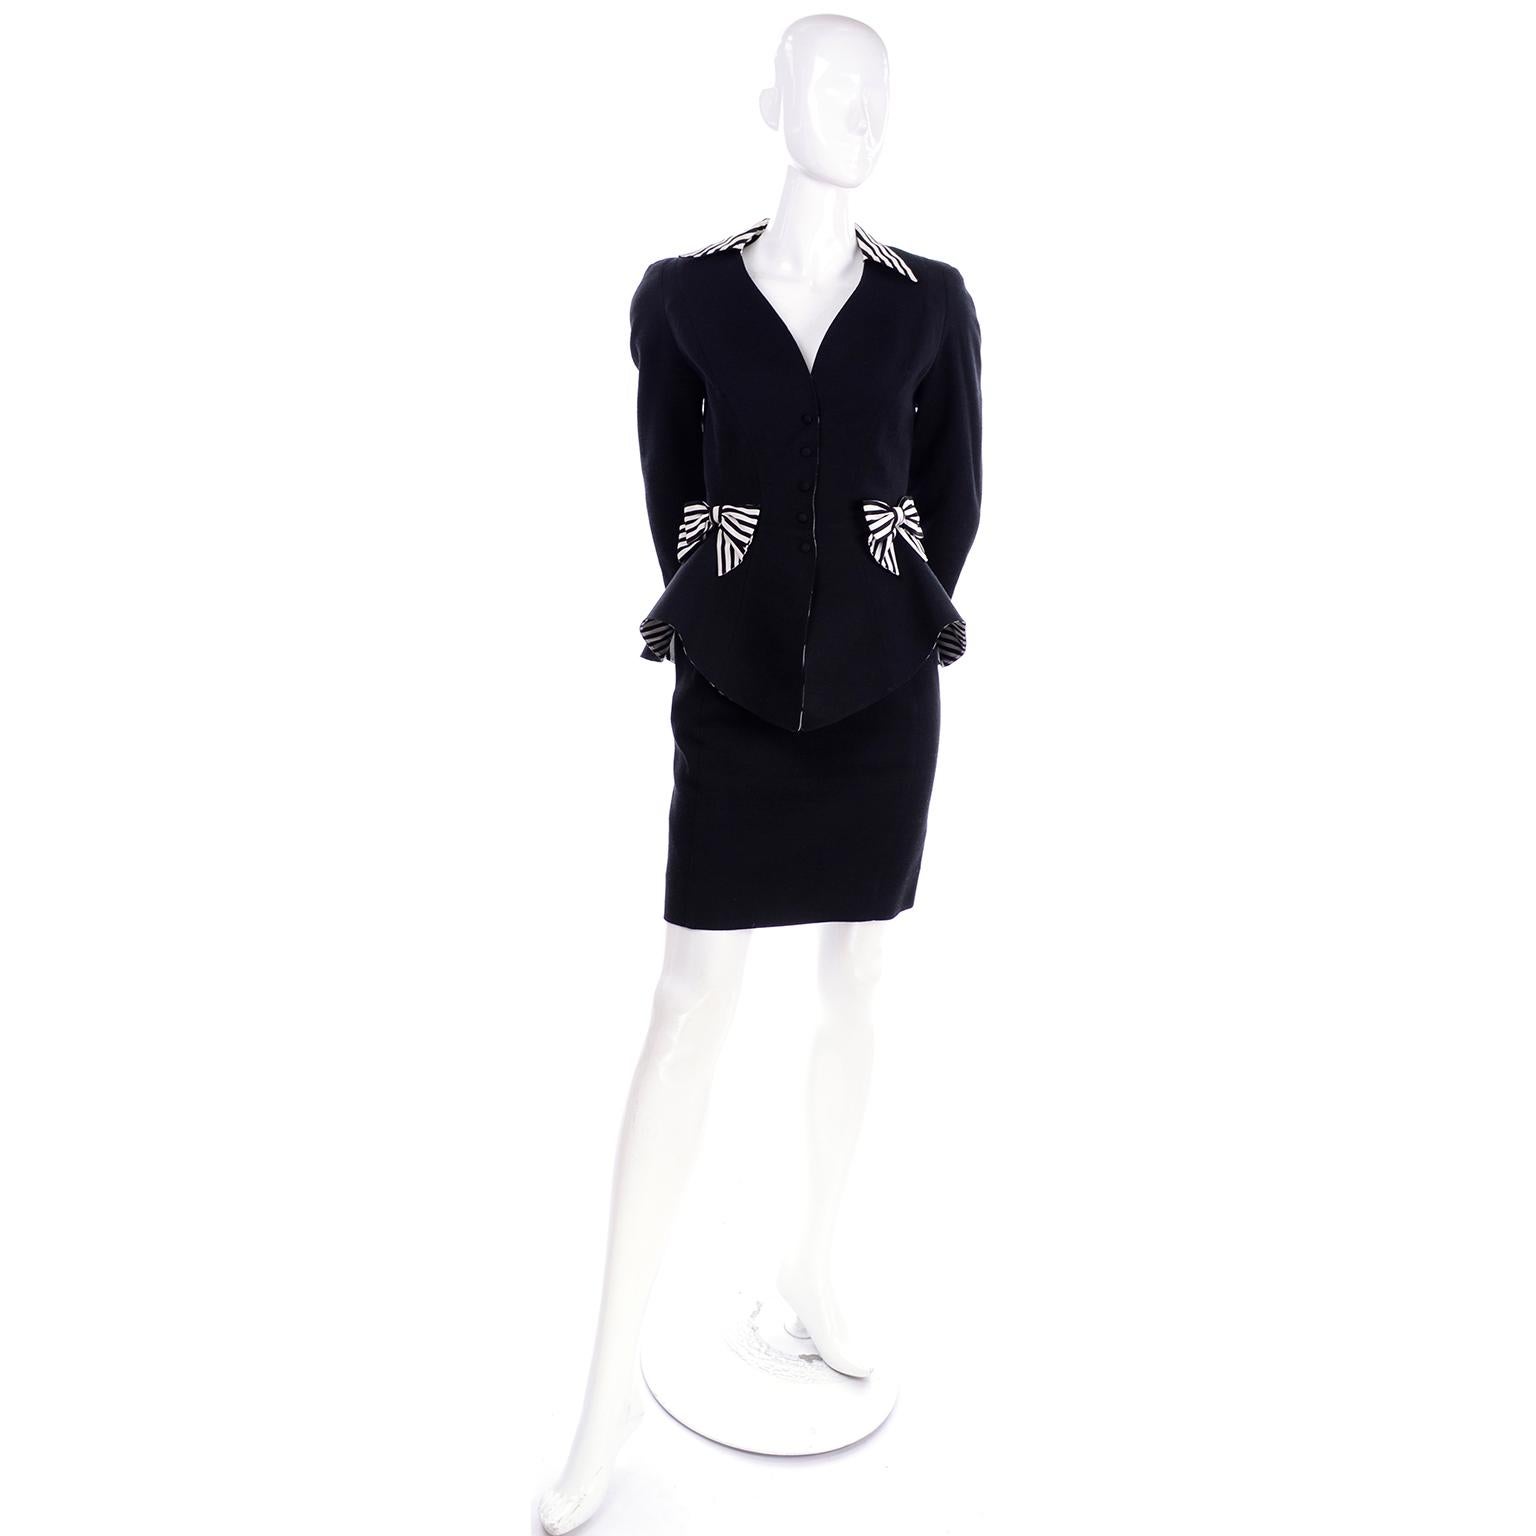 This is a vintage 1980's black cotton pique skirt suit designed by Thierry Mugler.  The peplum style blazer has black and white striped upturned cuffs, collar and bows.  We love that the peplum itself is lined with the same black and white stripe